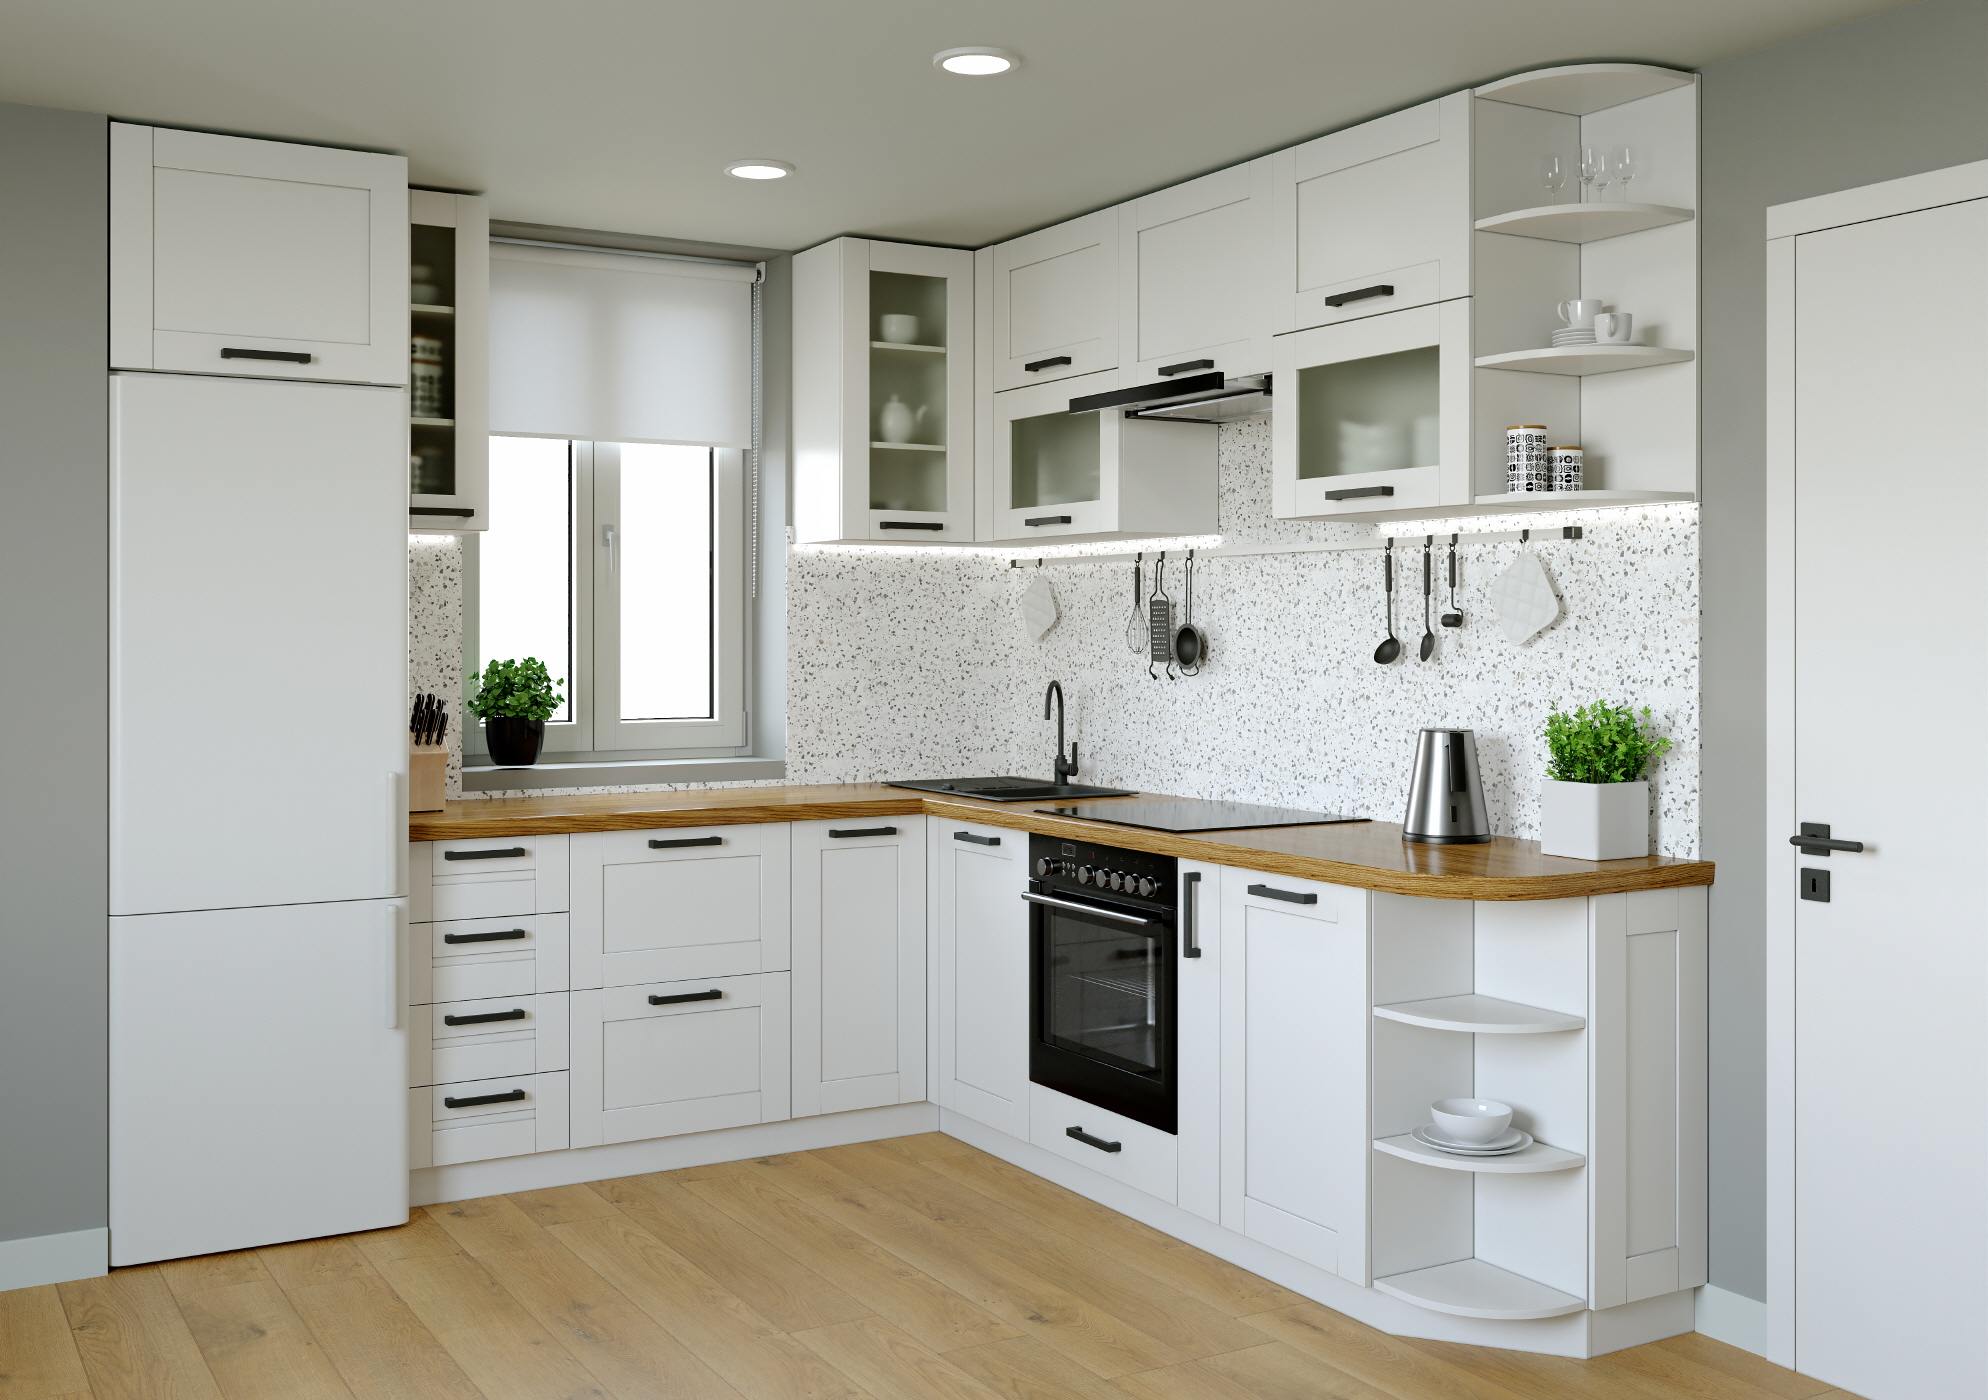 L-shaped kitchens are versatile and interactive, with potential for adding islands to increase seating and counter space.